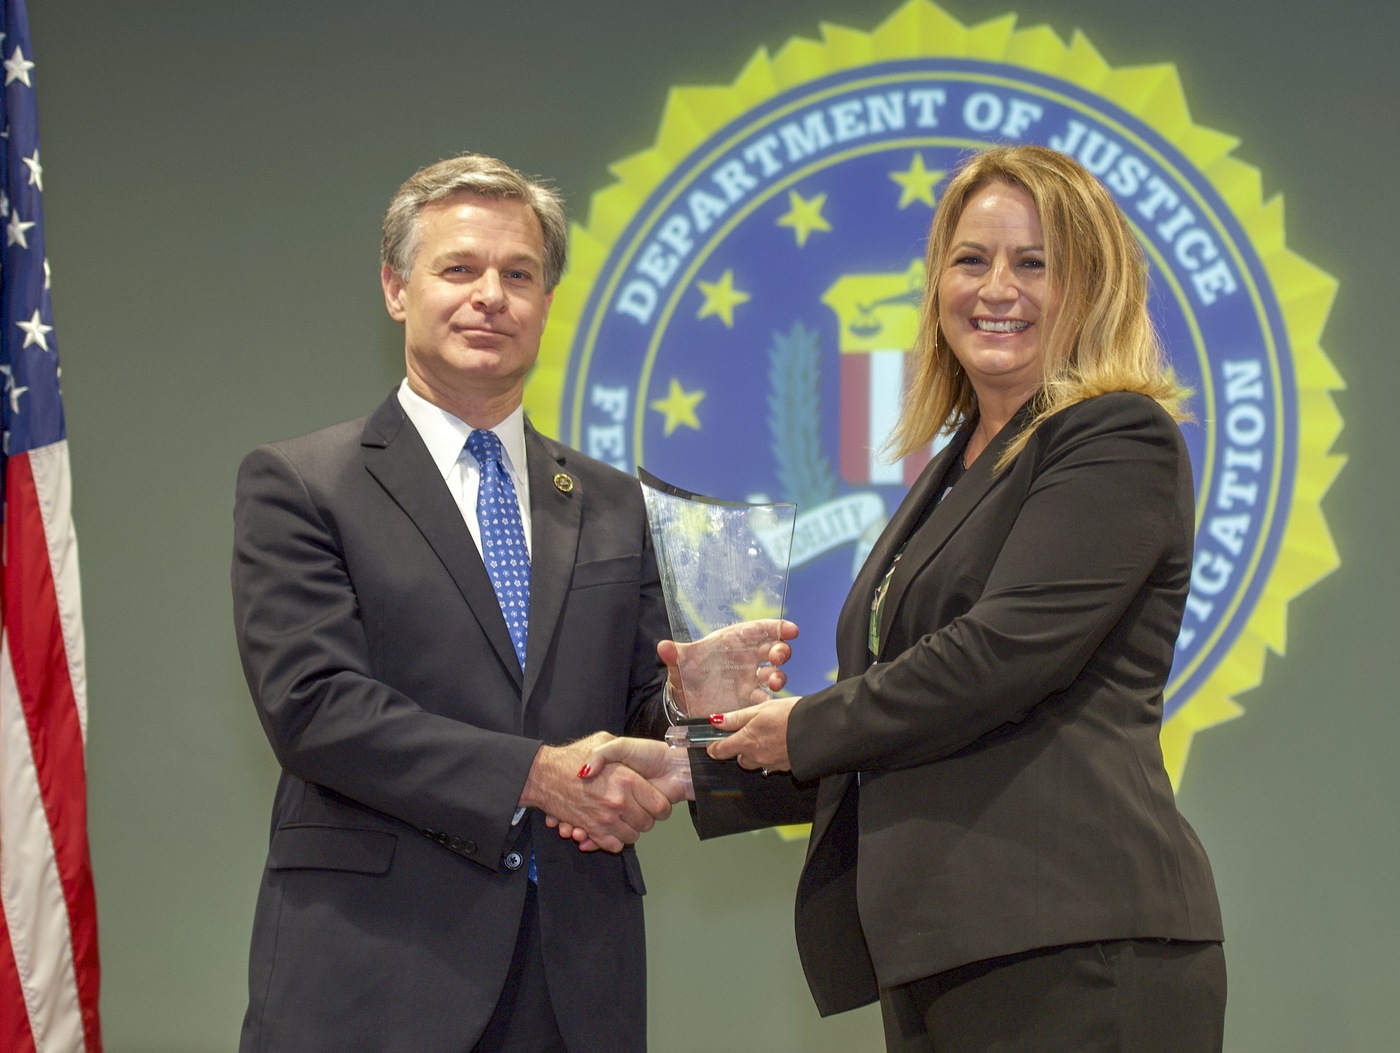 FBI Director Christopher Wray presents Anchorage Division recipient Priceless Alaska (represented by Gwen Adams) with the Director’s Community Leadership Award (DCLA) at a ceremony at FBI Headquarters on May 3, 2019.